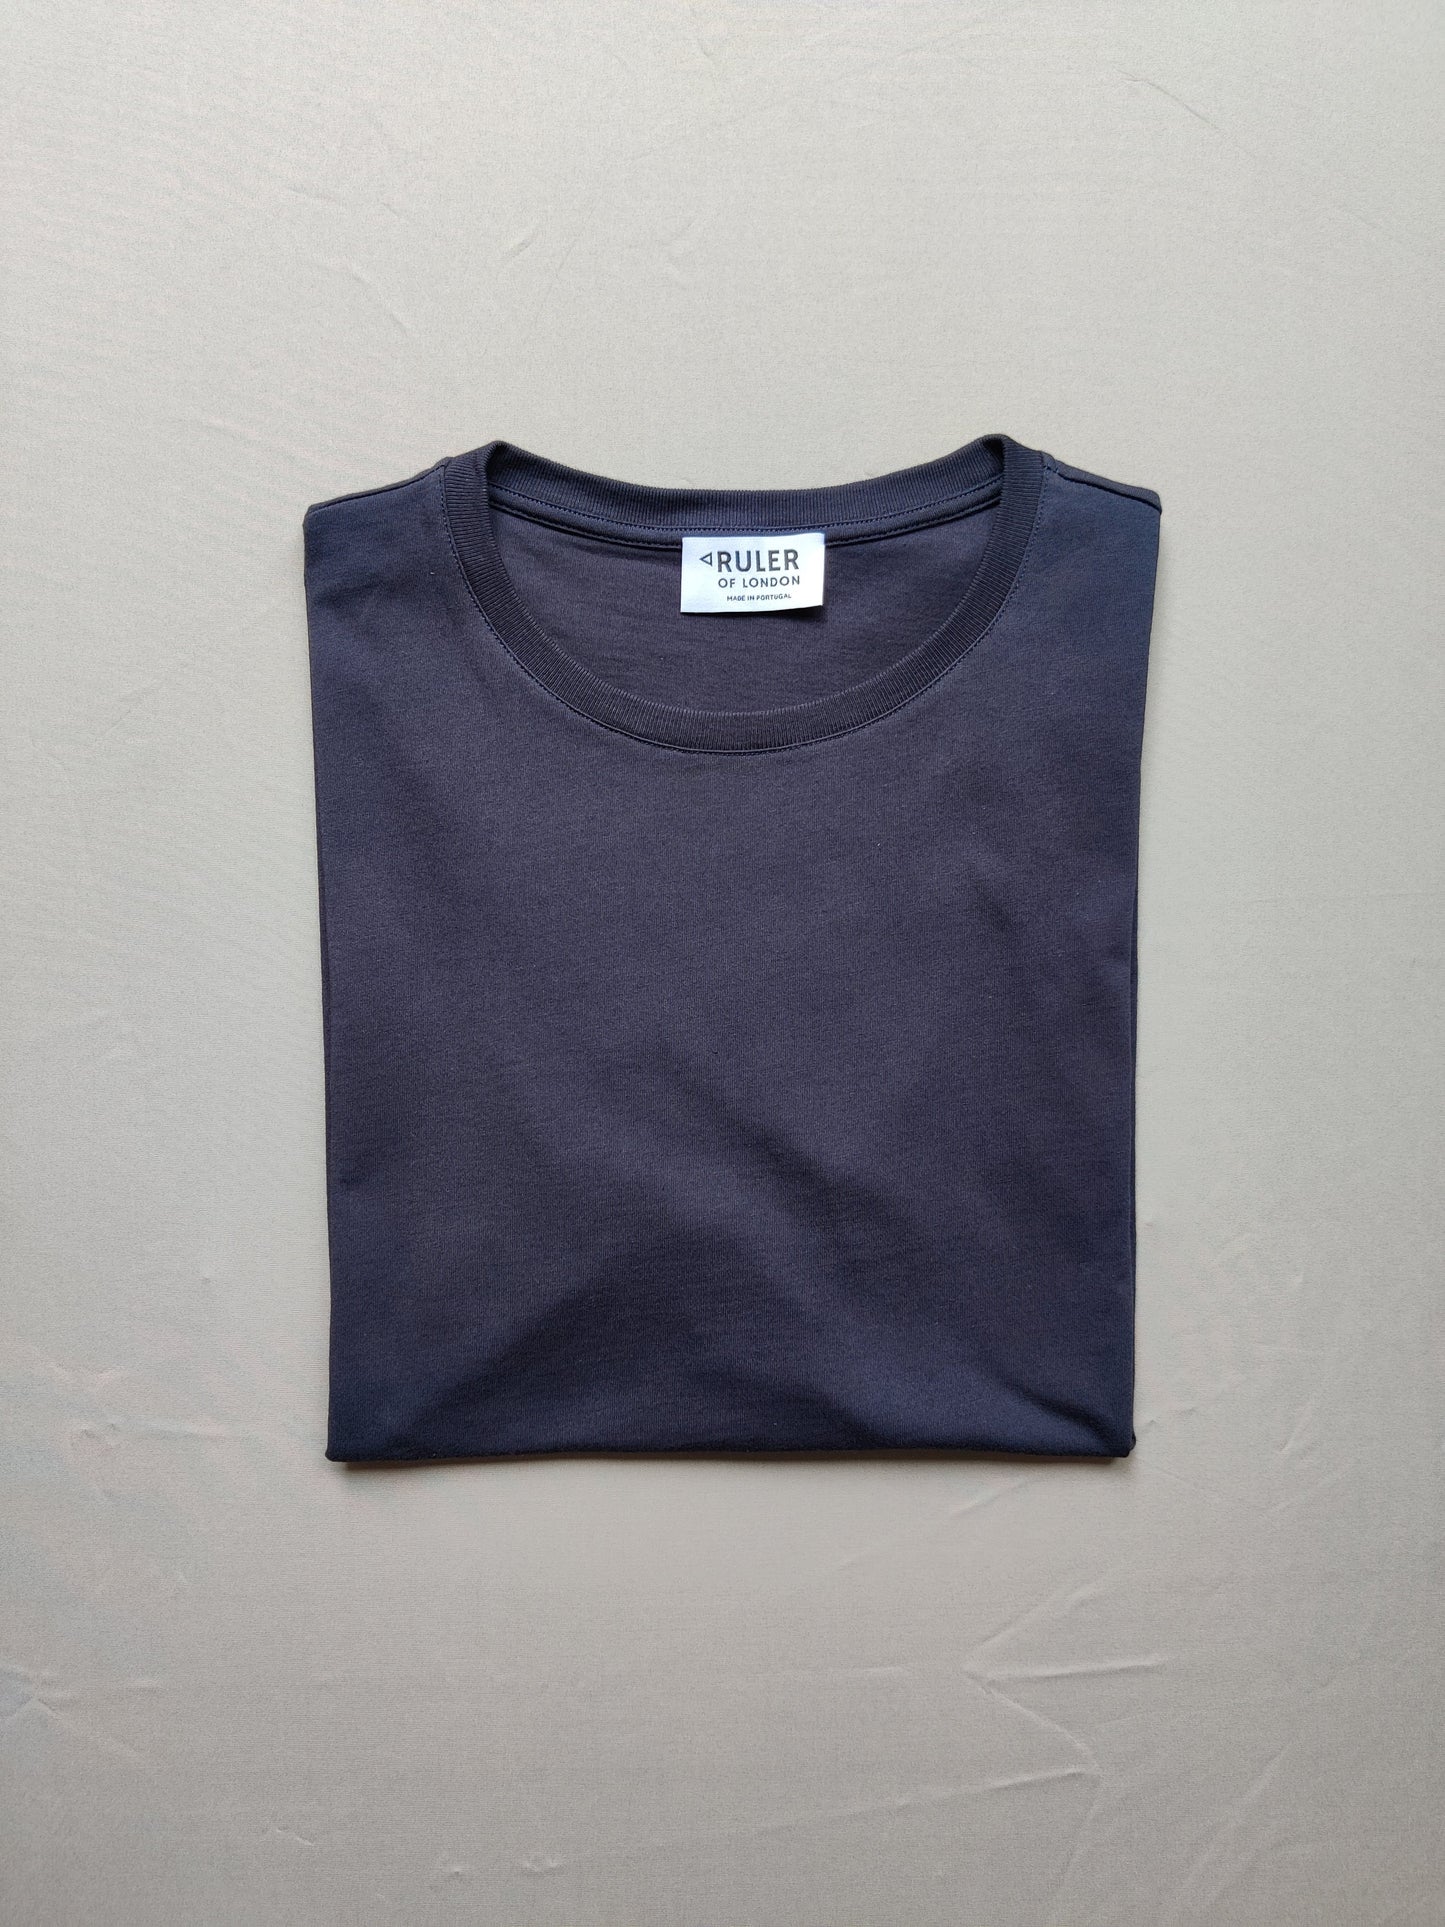 The Classic T-Shirt - Multipack of 3